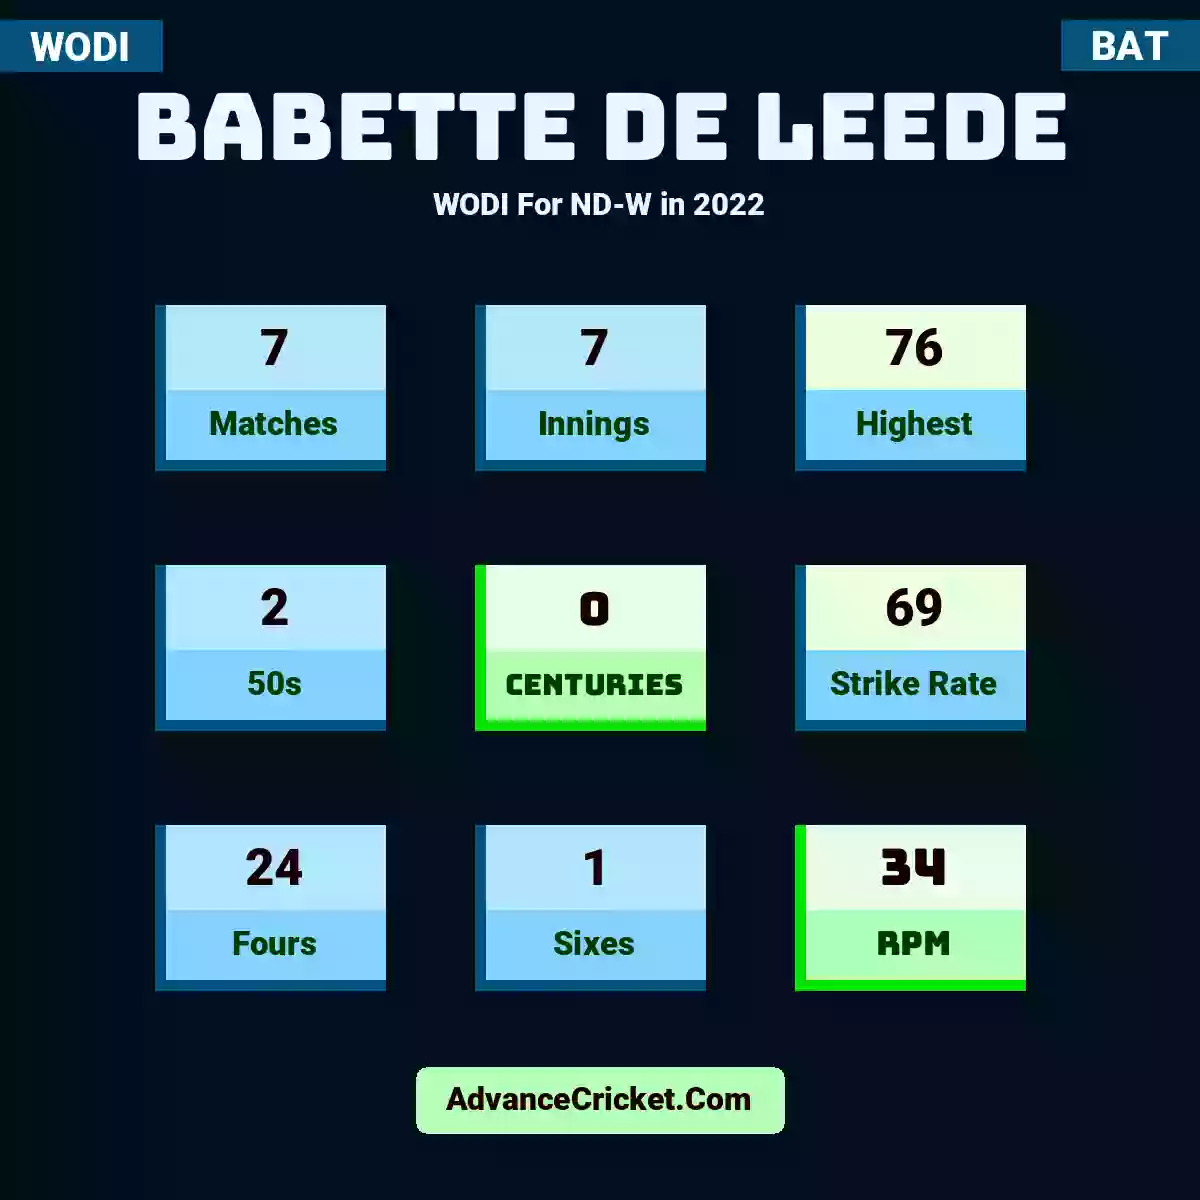 Babette de Leede WODI  For ND-W in 2022, Babette de Leede played 7 matches, scored 76 runs as highest, 2 half-centuries, and 0 centuries, with a strike rate of 69. B.Leede hit 24 fours and 1 sixes, with an RPM of 34.